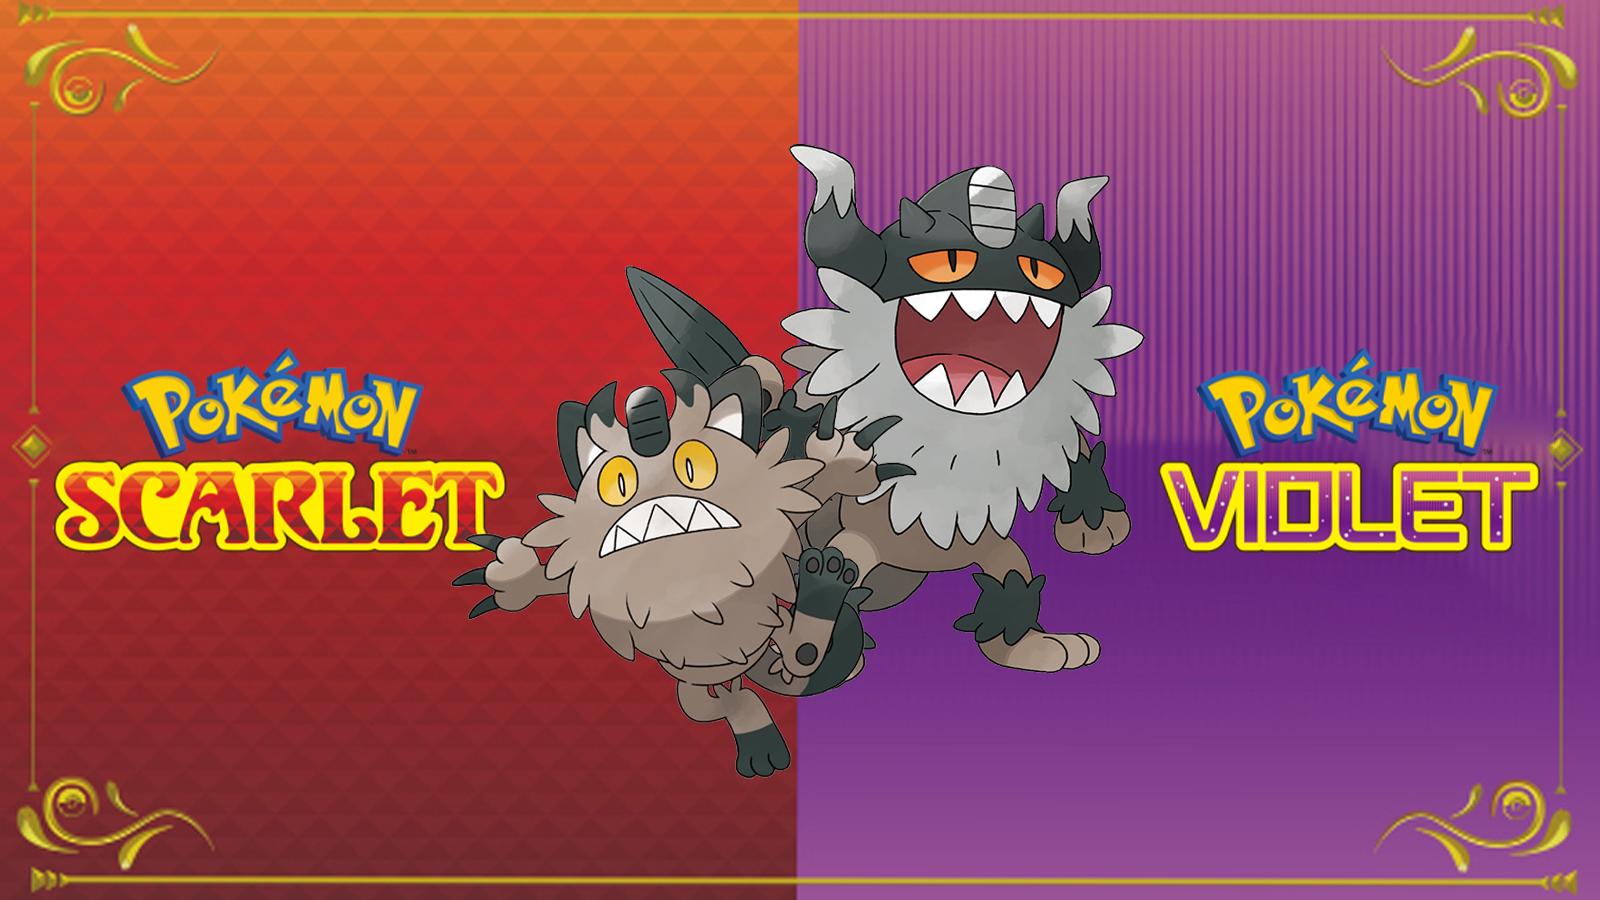 Galarian meowth and Perrserker in Pokemon Scarlet and Violet